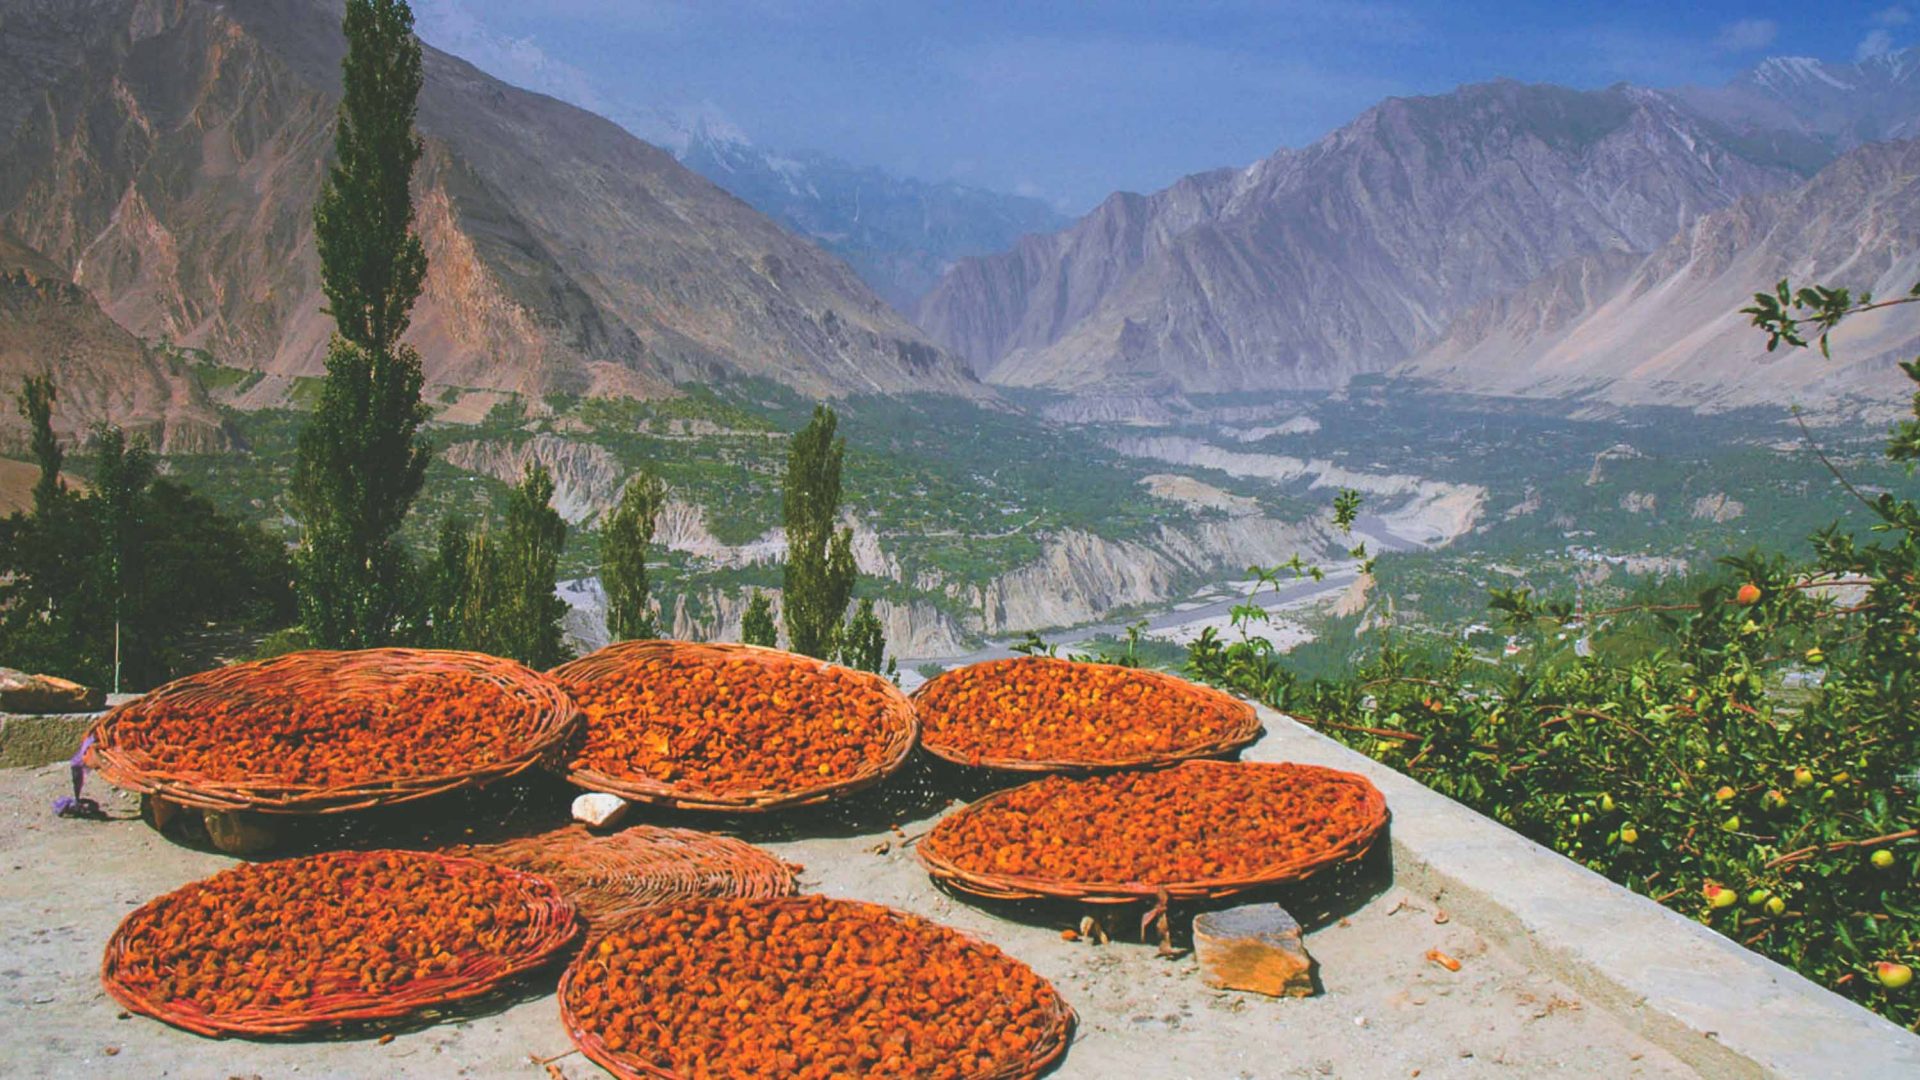 Drying spices and mountain vistas are two things you can be certain of during this Baltistan food tour in Pakistan.